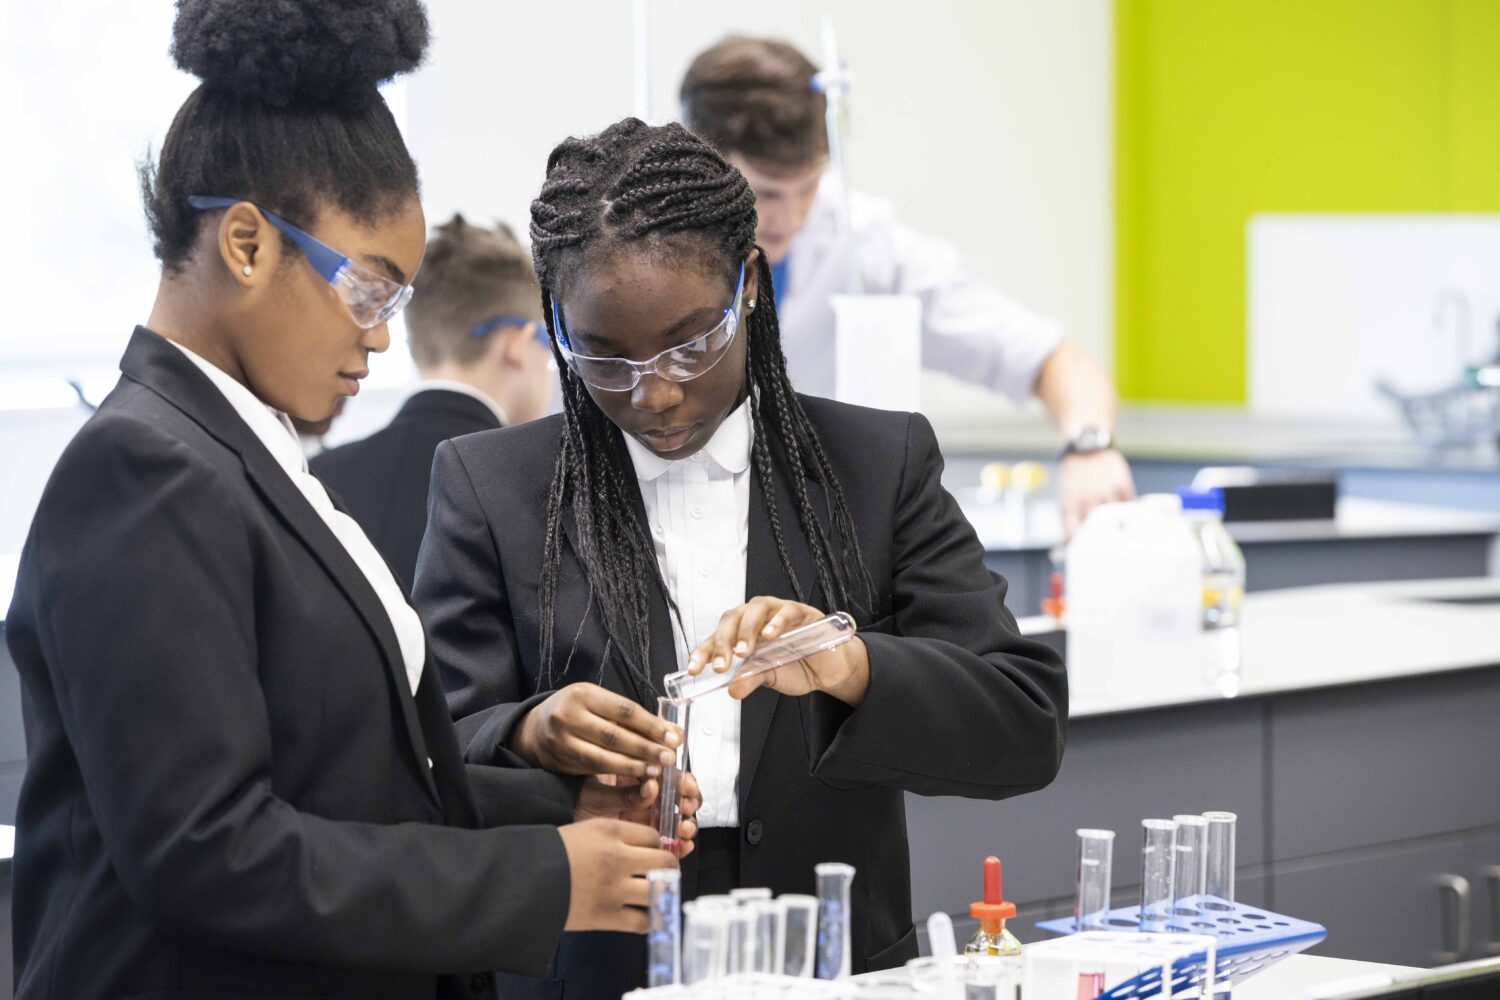 Two female students are pictured conducting a Science experiment in the foreground, using chemicals and glass vials. Other students are seen doing the same in the background.